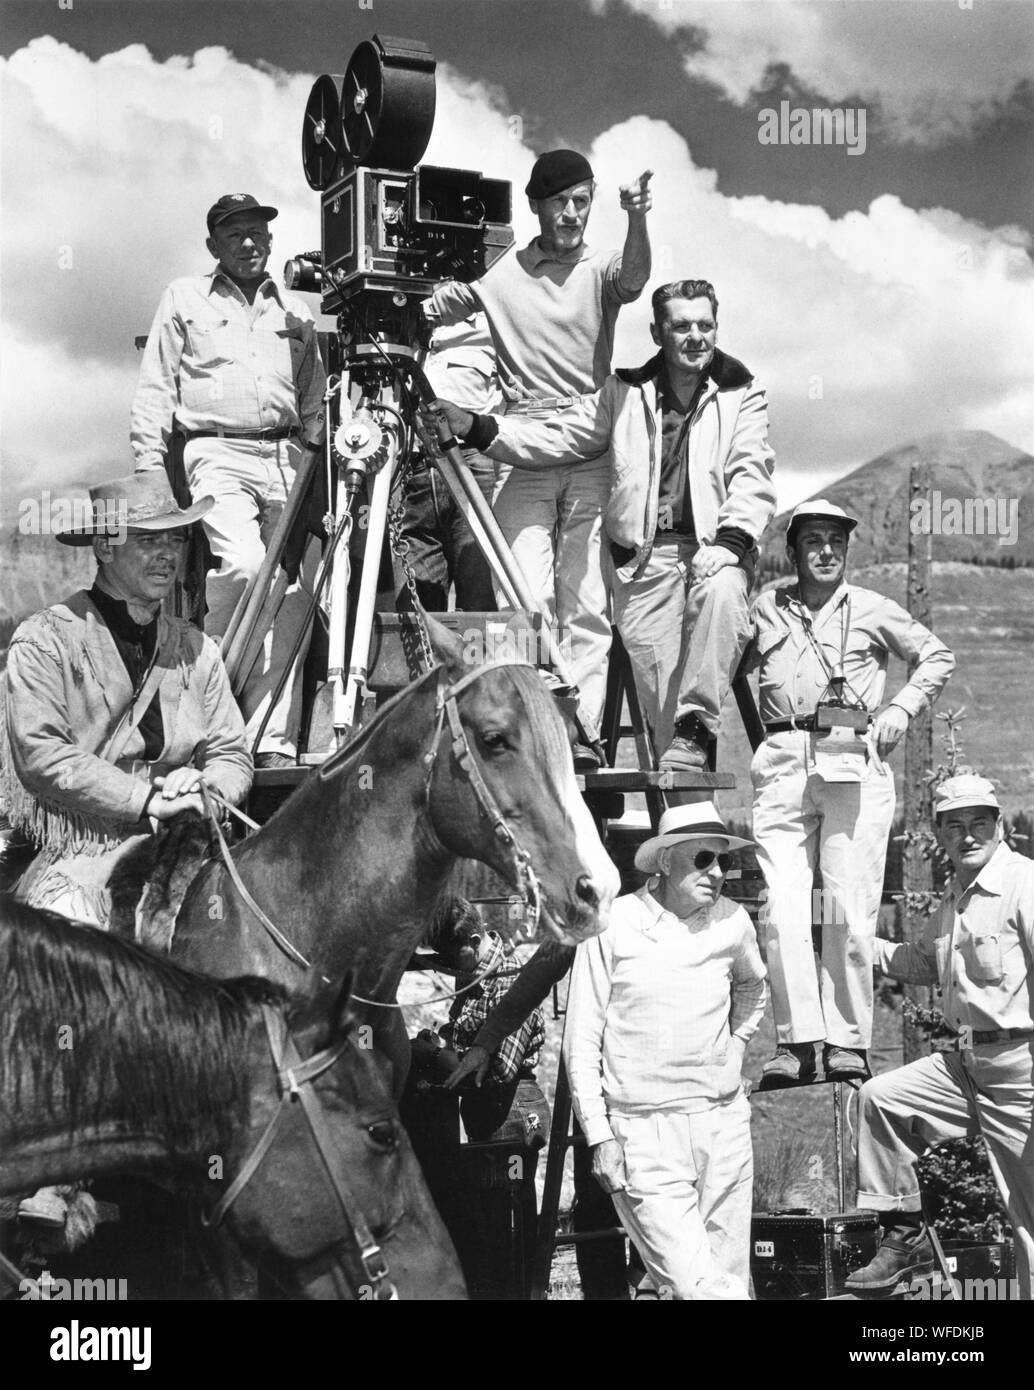 CLARK GABLE as Flint Mitchell on set location filming with camera crew including WILLIAM C. MELLOR and director William A. WELLMAN in ACROSS THE WIDE MISSOURI 1951 screenplay Talbot Jennings book Bernard DeVoto Metro Goldwyn Mayer Stock Photo